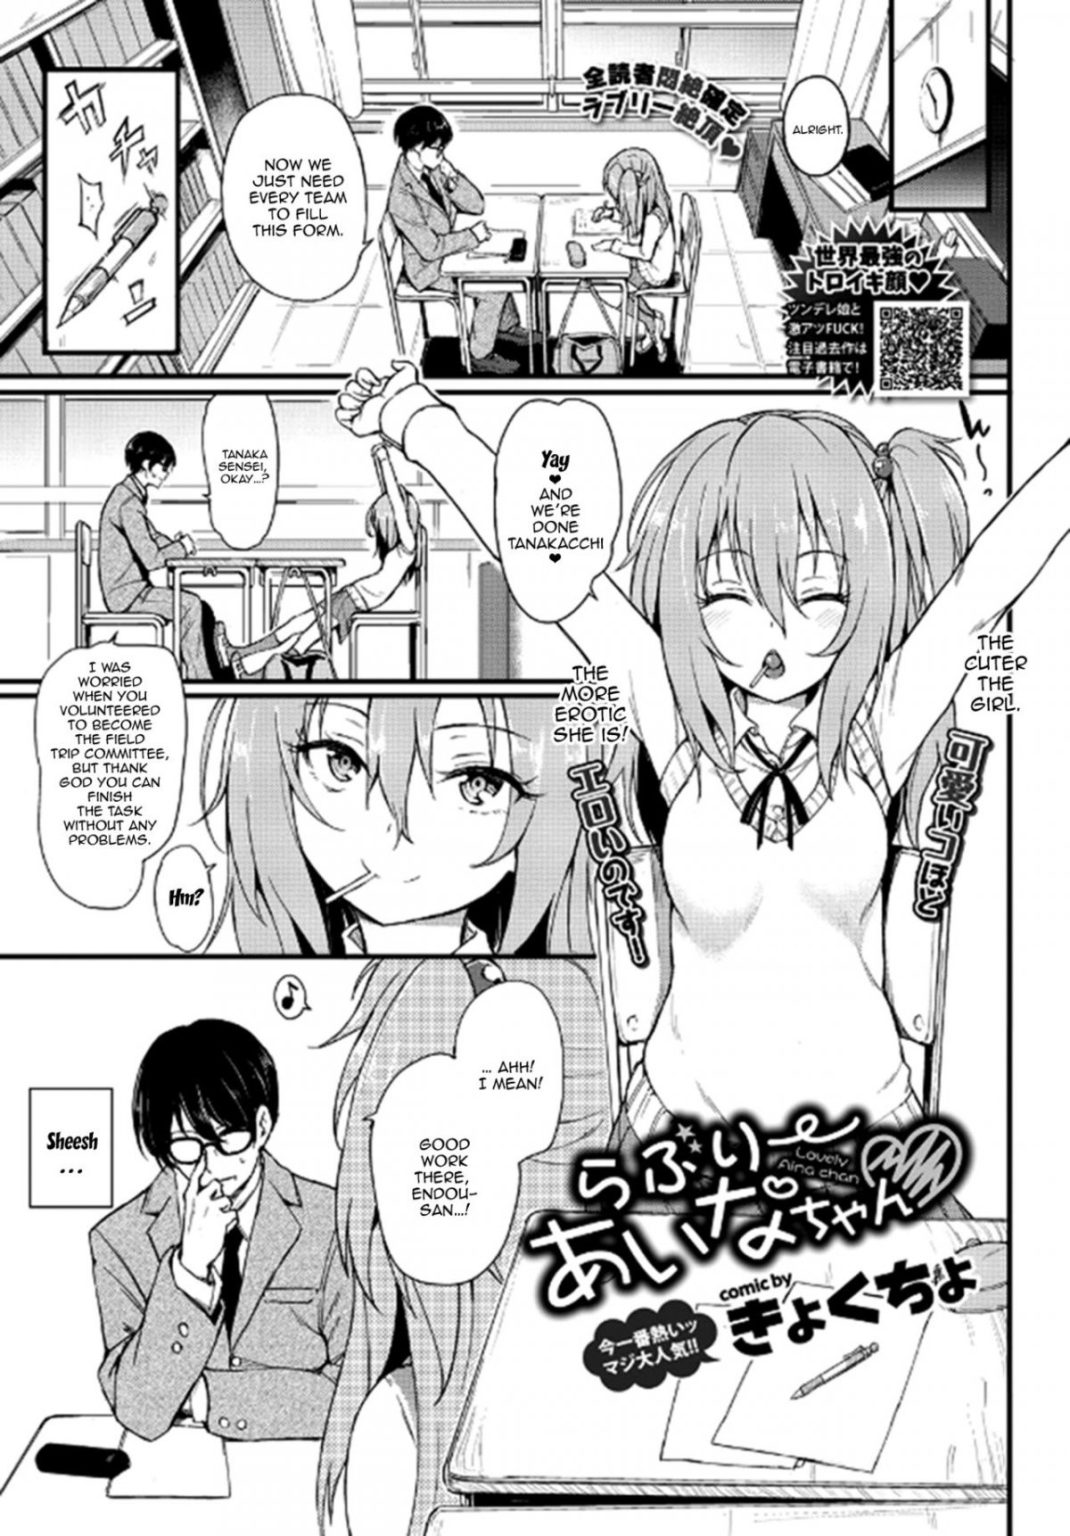 Lovely Aina-chan - Chapter 1 porn comic picture 3